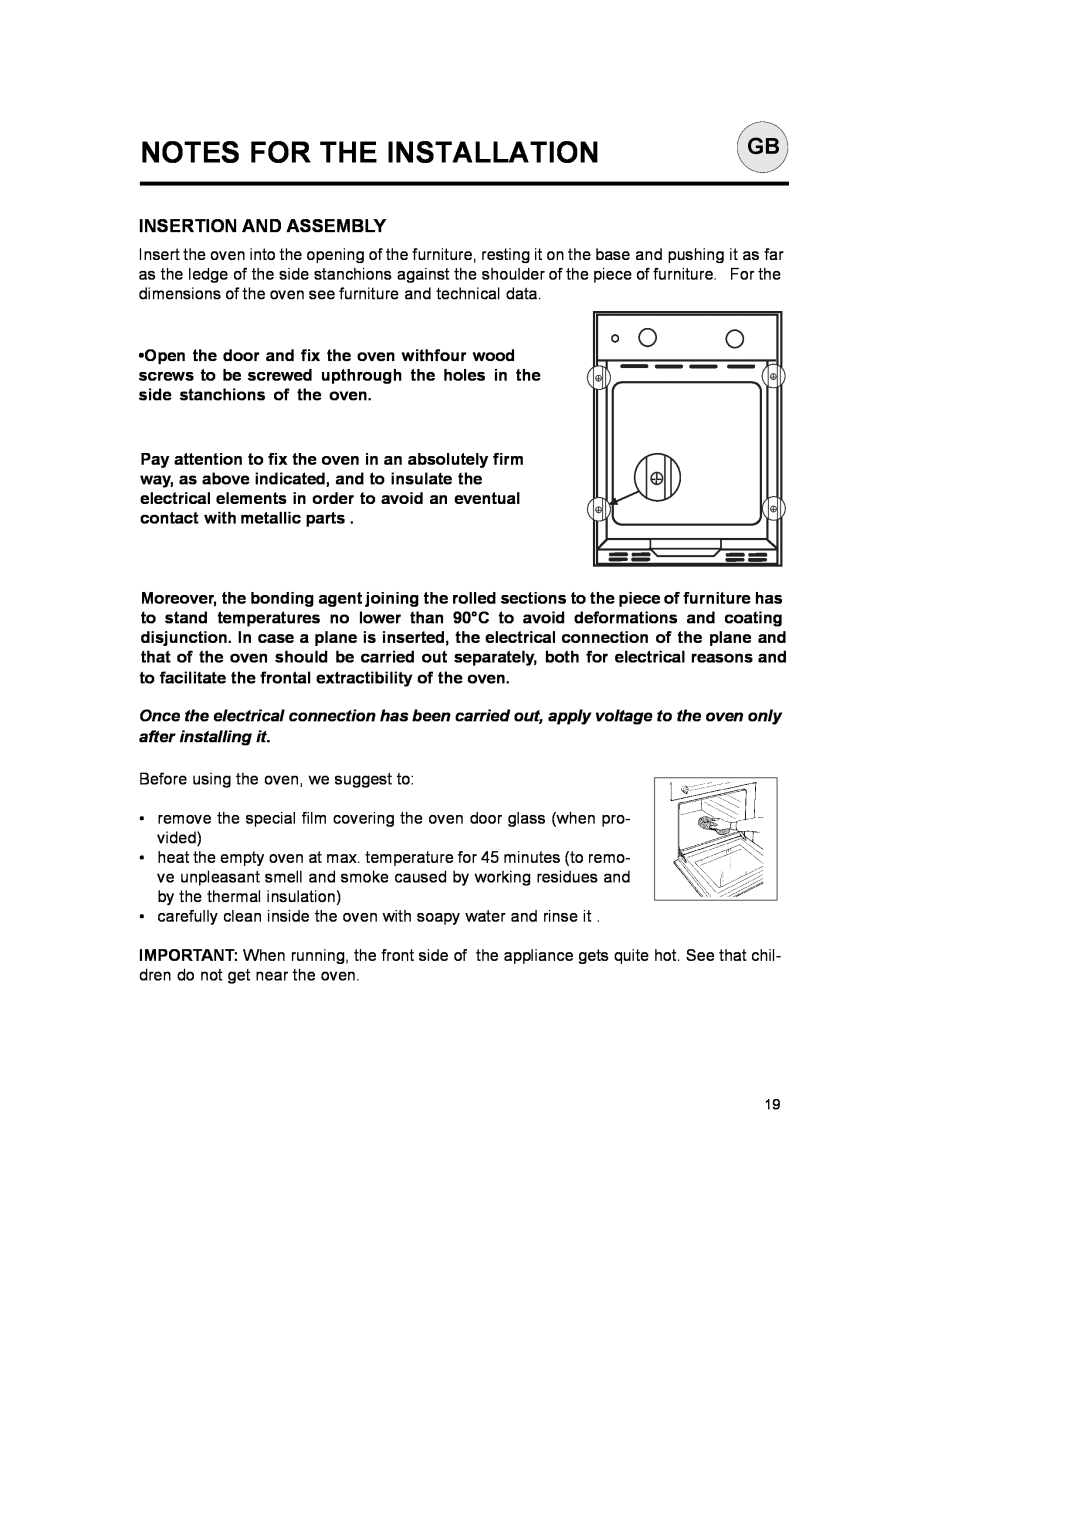 CDA SC145 manual Insertion And Assembly, Notes For The Installation 